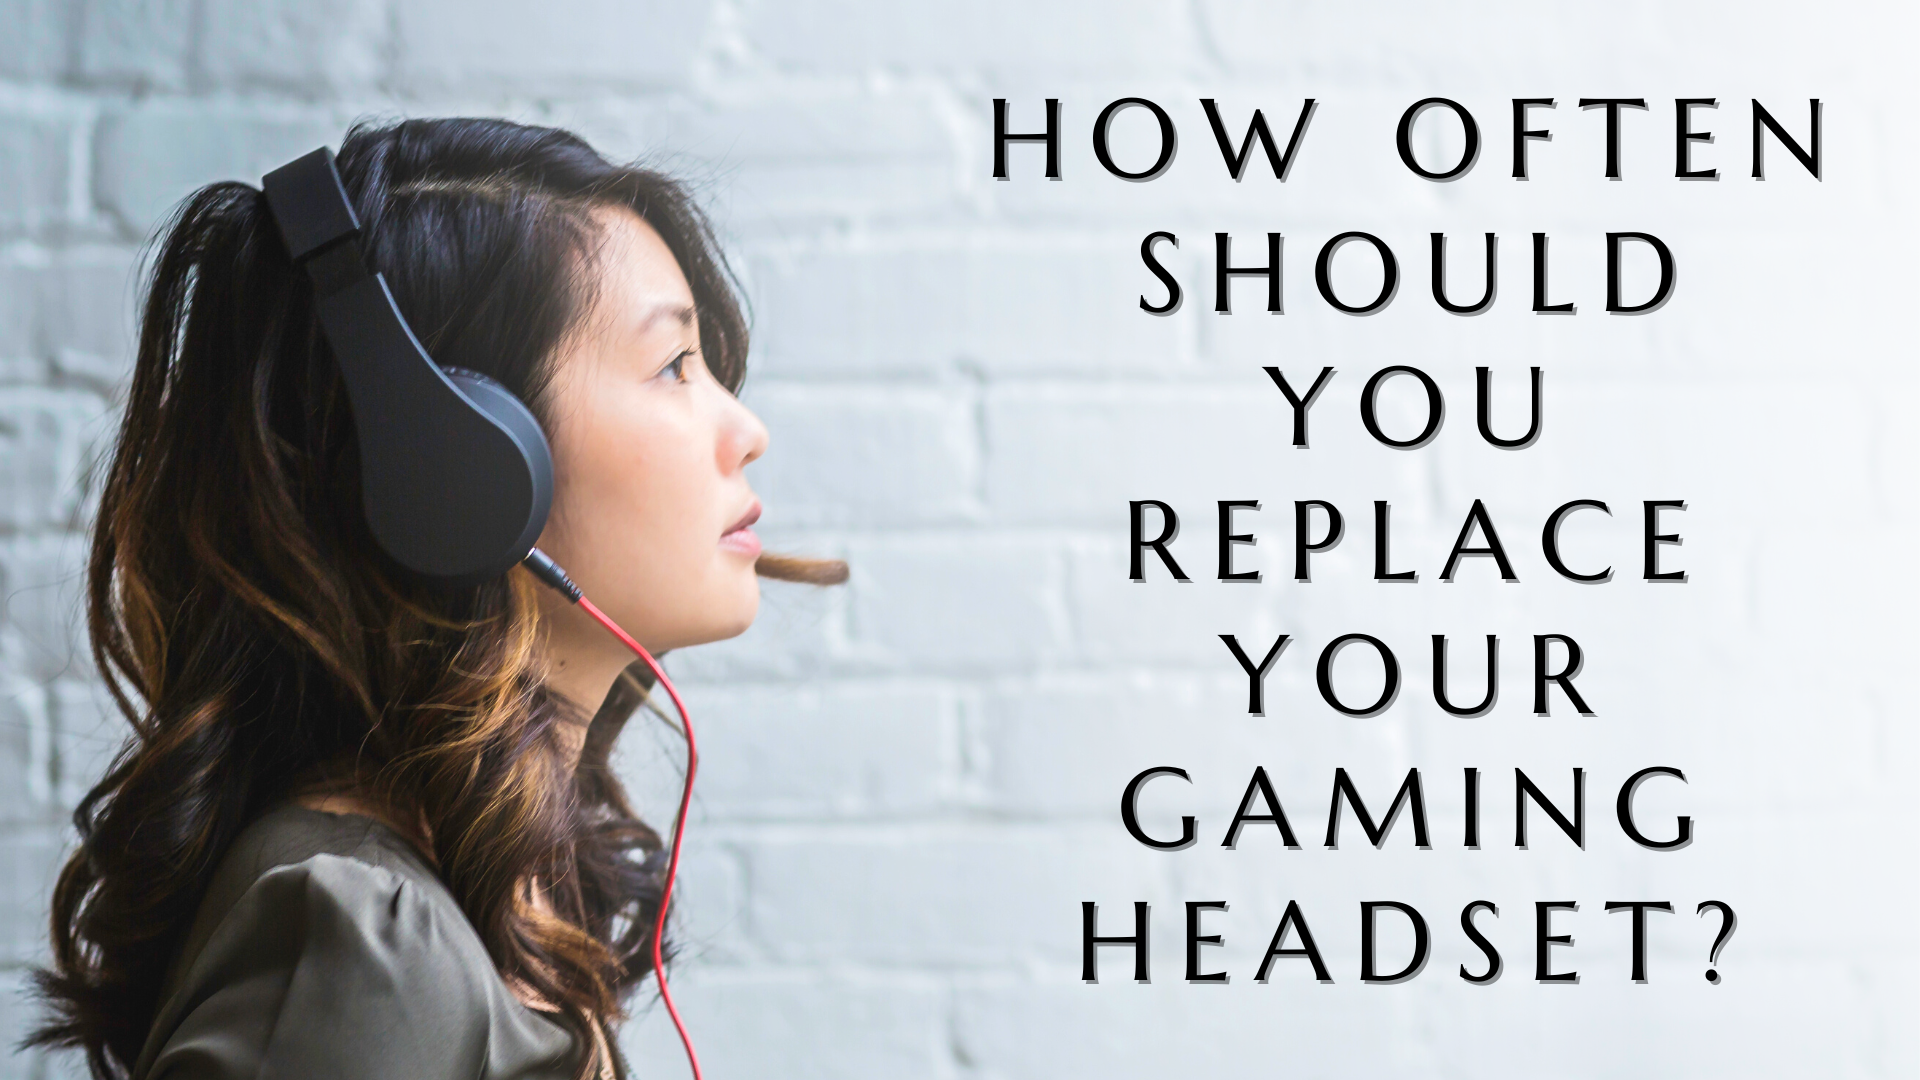 How often should you replace your gaming headset